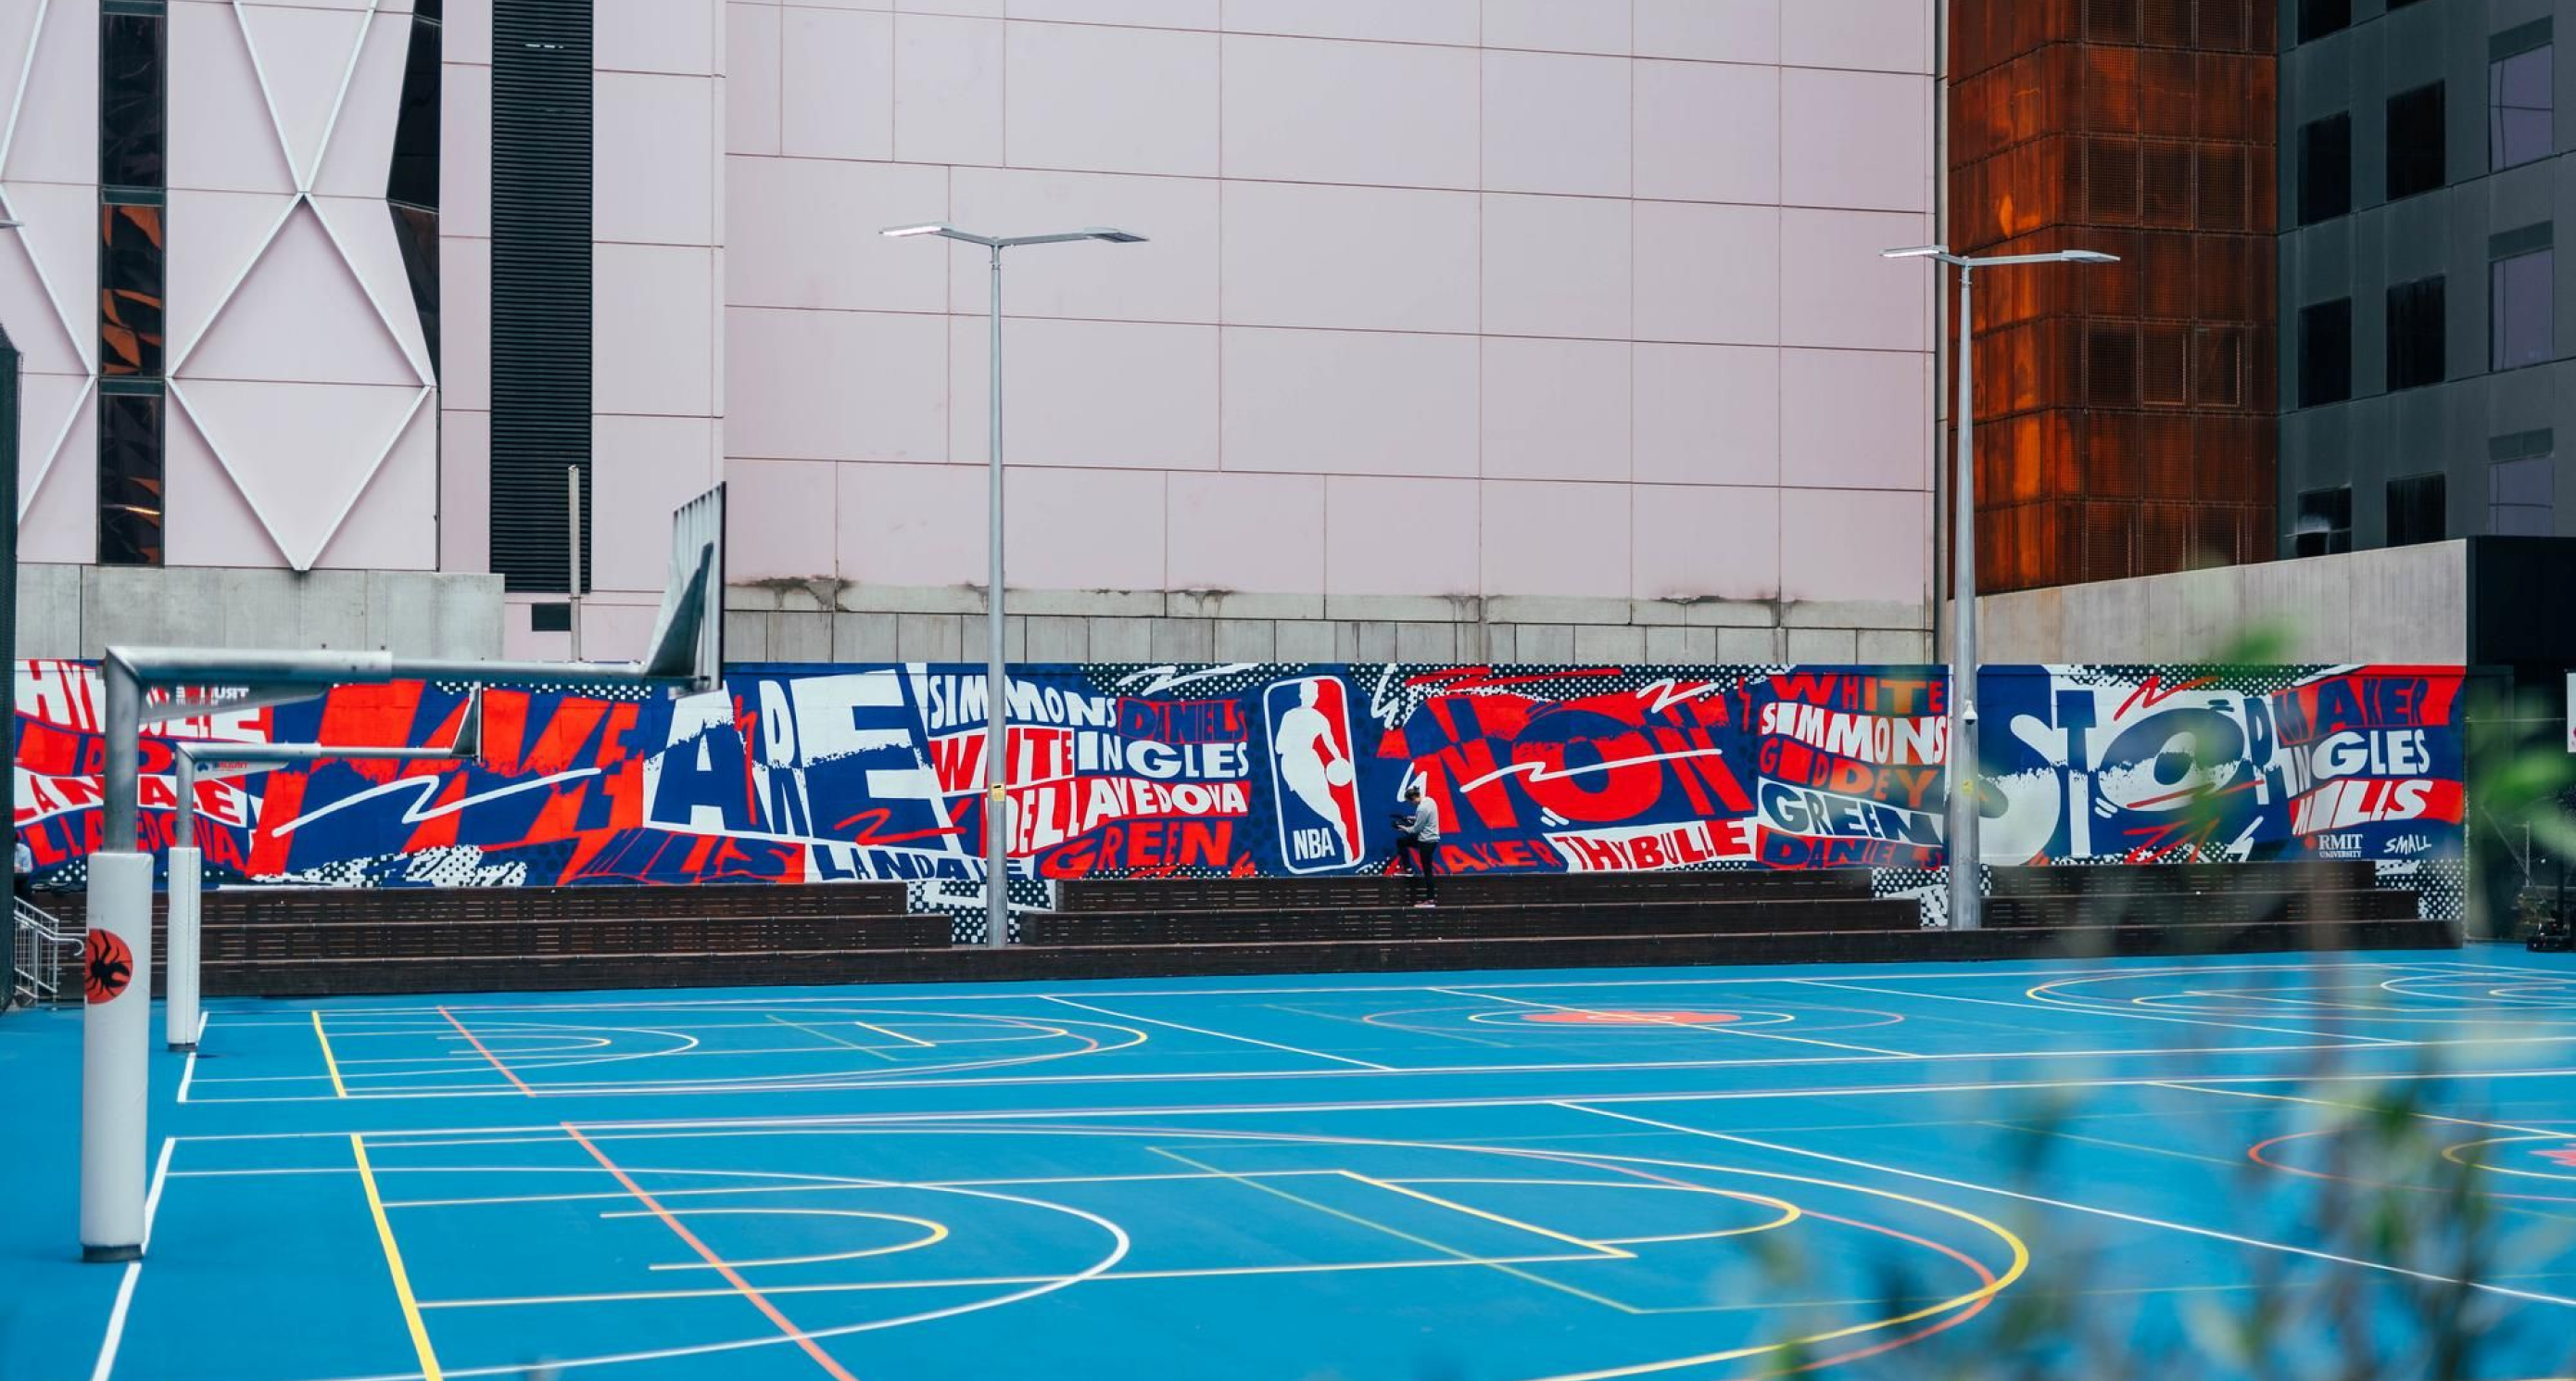 An outdoor basketball court with a painted mural by Kris Andrew Small